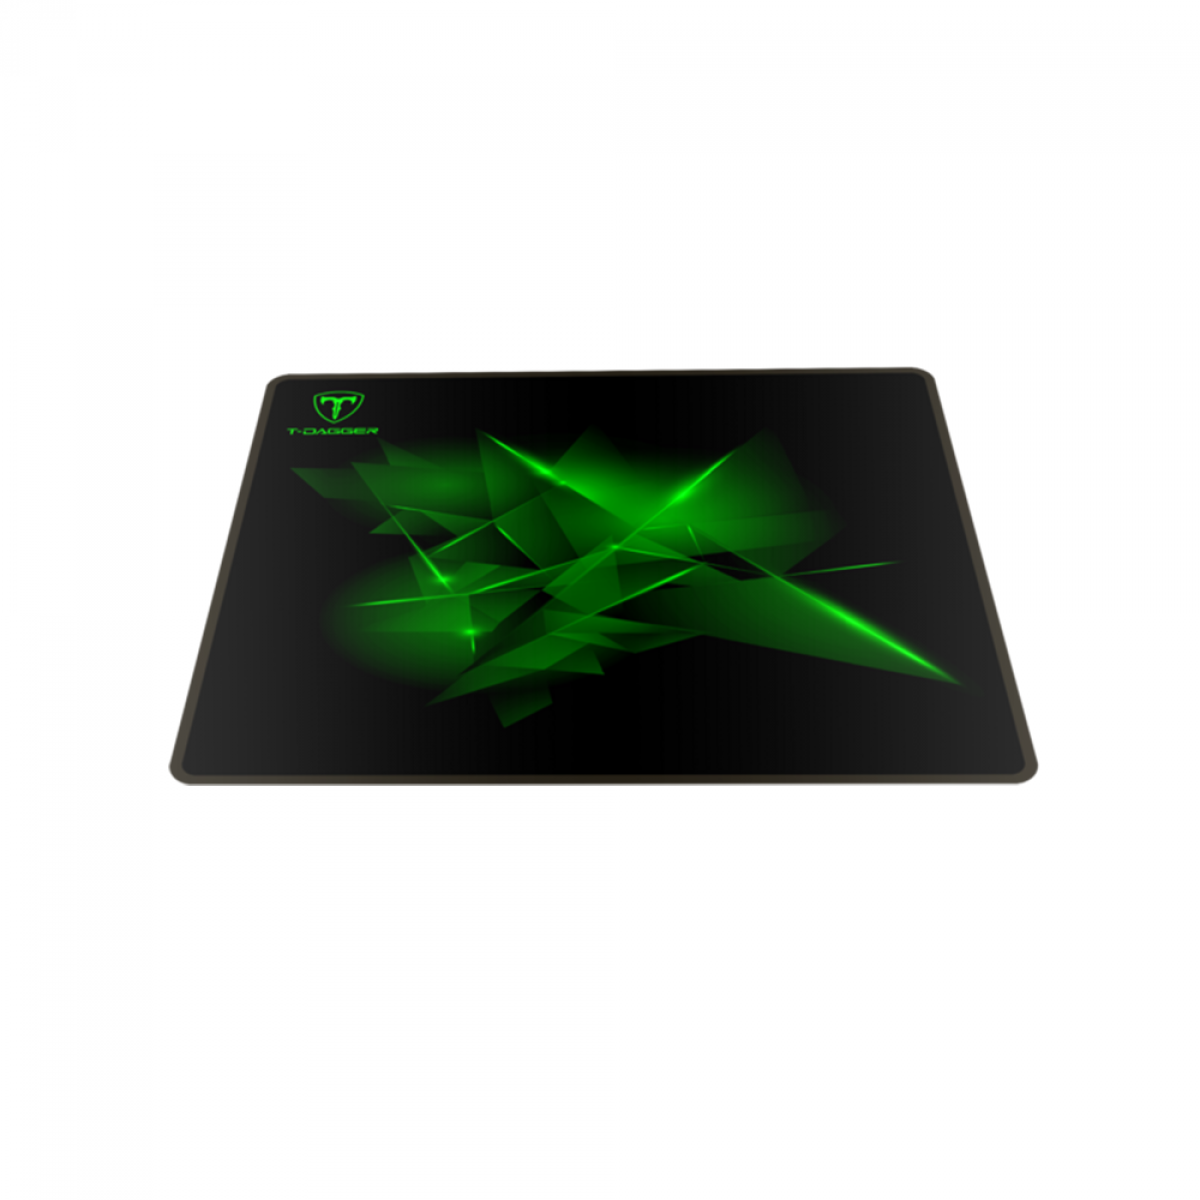 Mouse Pad Gamer T-Dagger Geometry-S, Speed, Pequeno, T-TMP101